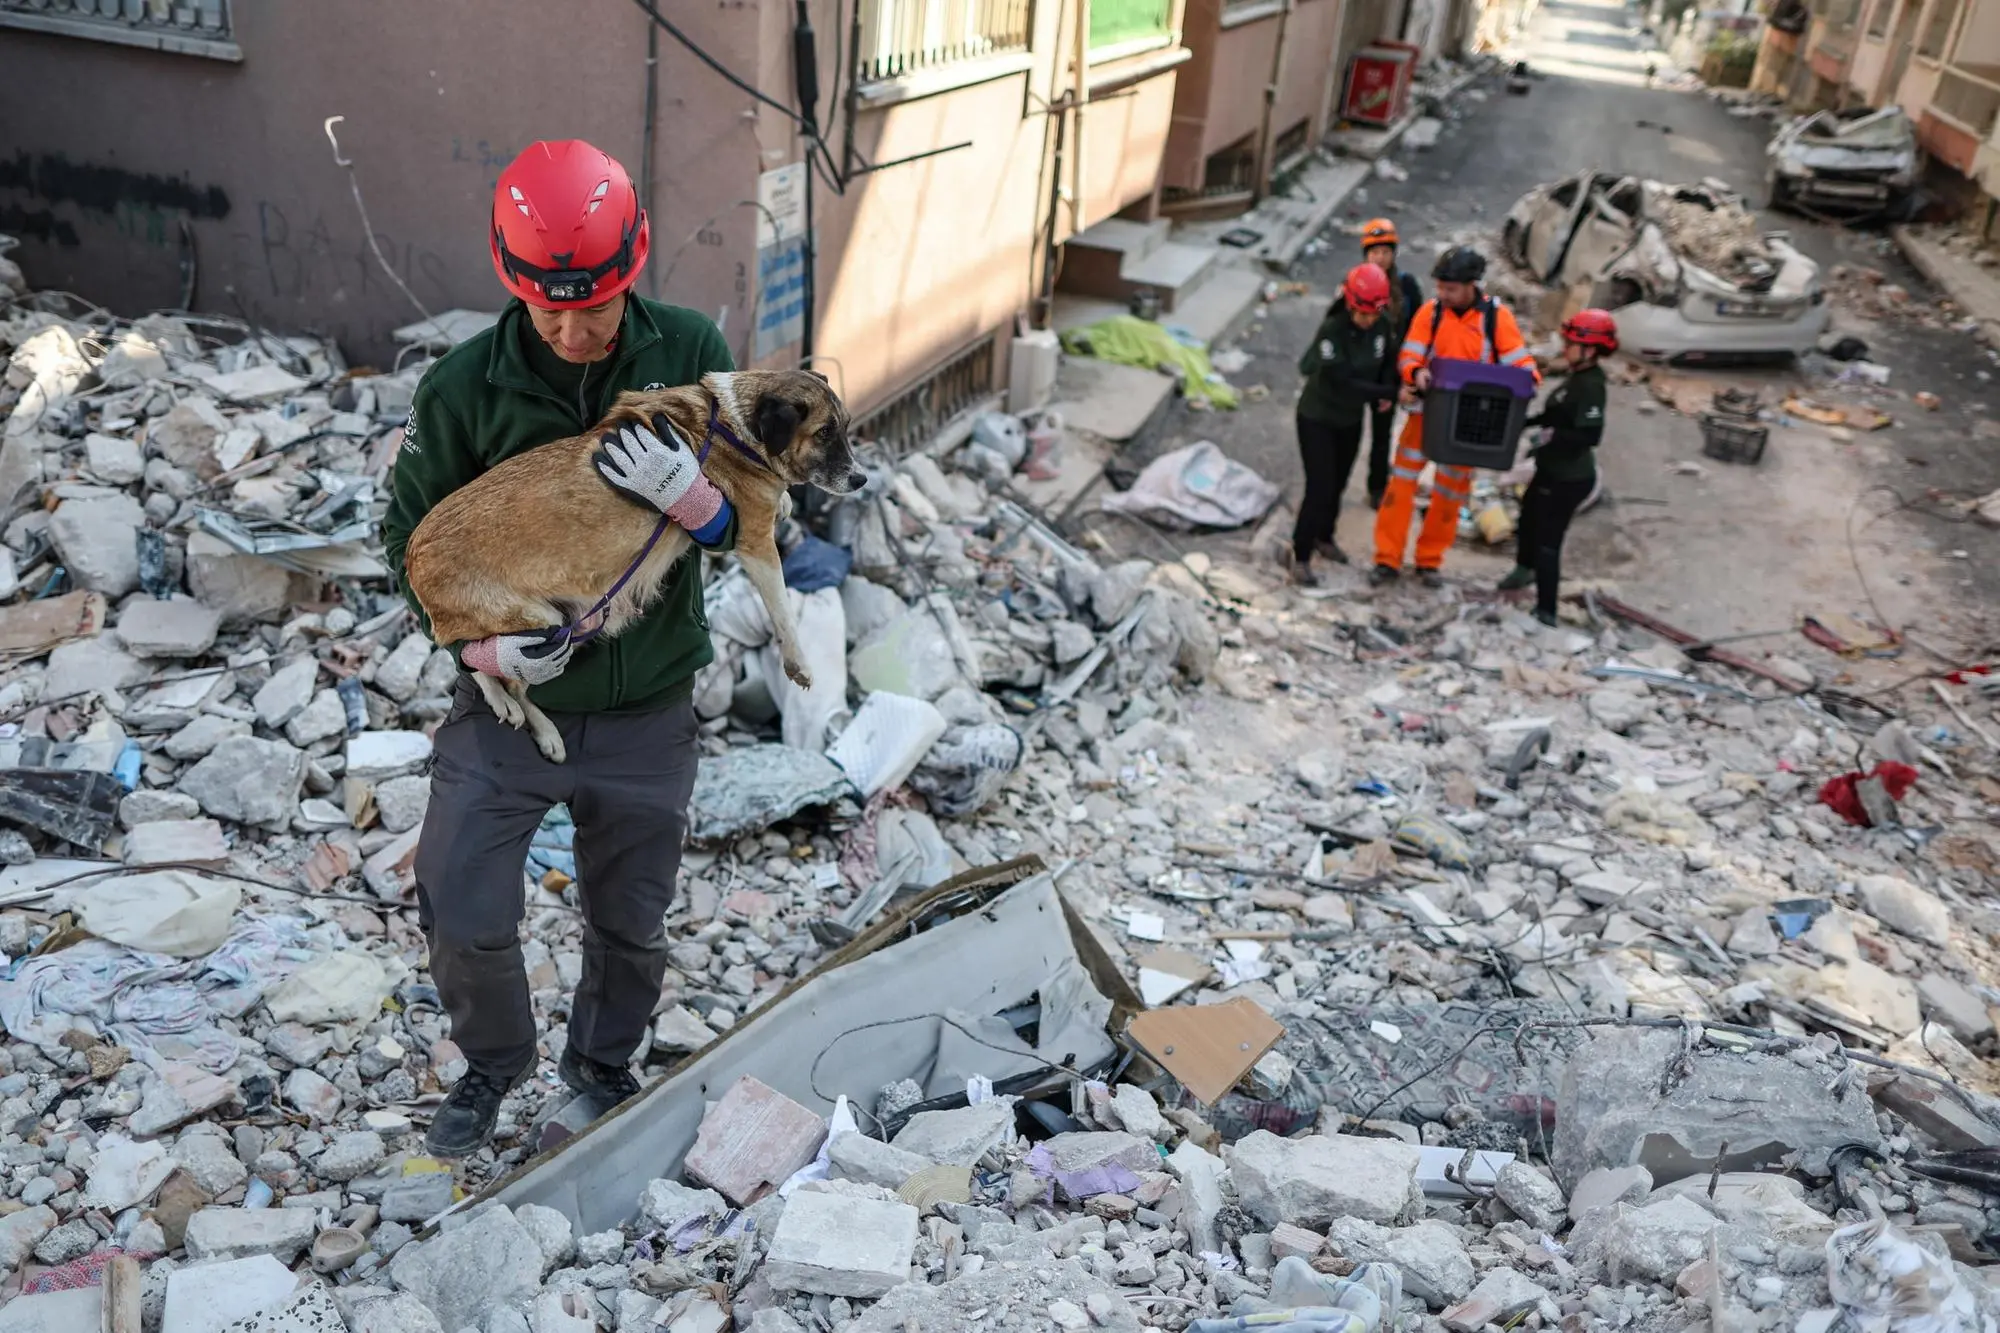 epa10479895 US members of Humane Society International rescue a dog with five puppies from the rubble after powerful earthquake in Hatay, Turkey, 20 February 2023. More than 45,000 people have died and thousands more are injured after two major earthquakes struck southern Turkey and northern Syria on 06 February. HAYTAP, The Federation of the Animals Rights in Turkey, rescued and treated approximately 700 animals in the animal field hospital. Animals, whose owners cannot be reached, are adopted by volunteers in other cities after being treated in the hospital. EPA/ERDEM SAHIN ATTENTION: This Image is part of a PHOTO SET